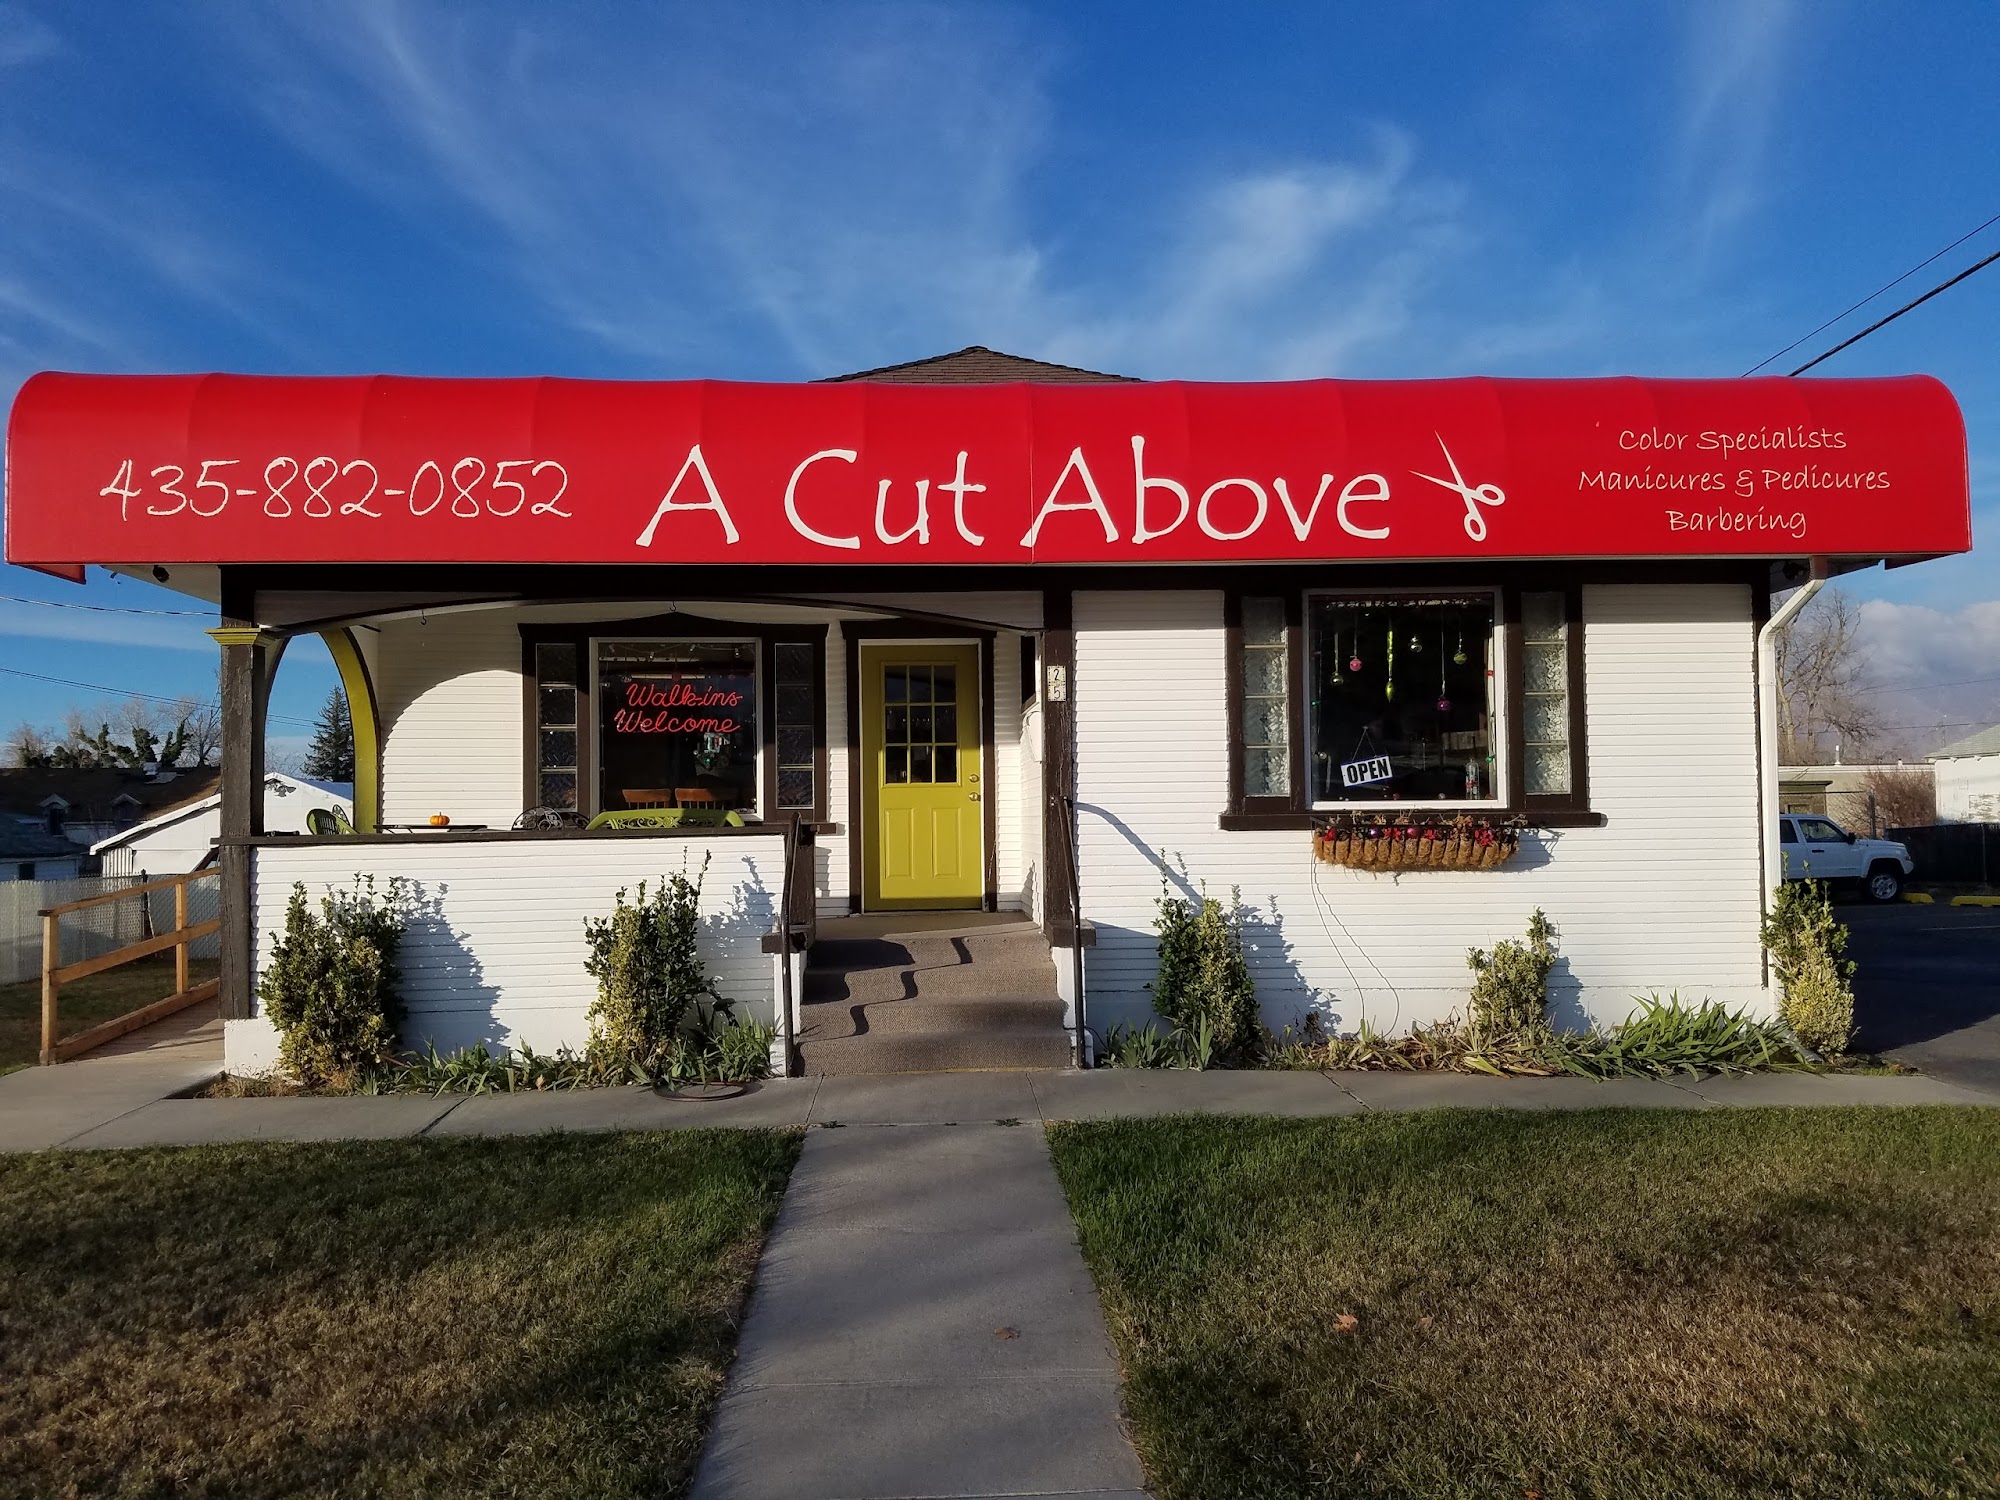 A Cut Above barber shop and a full service beauty salon